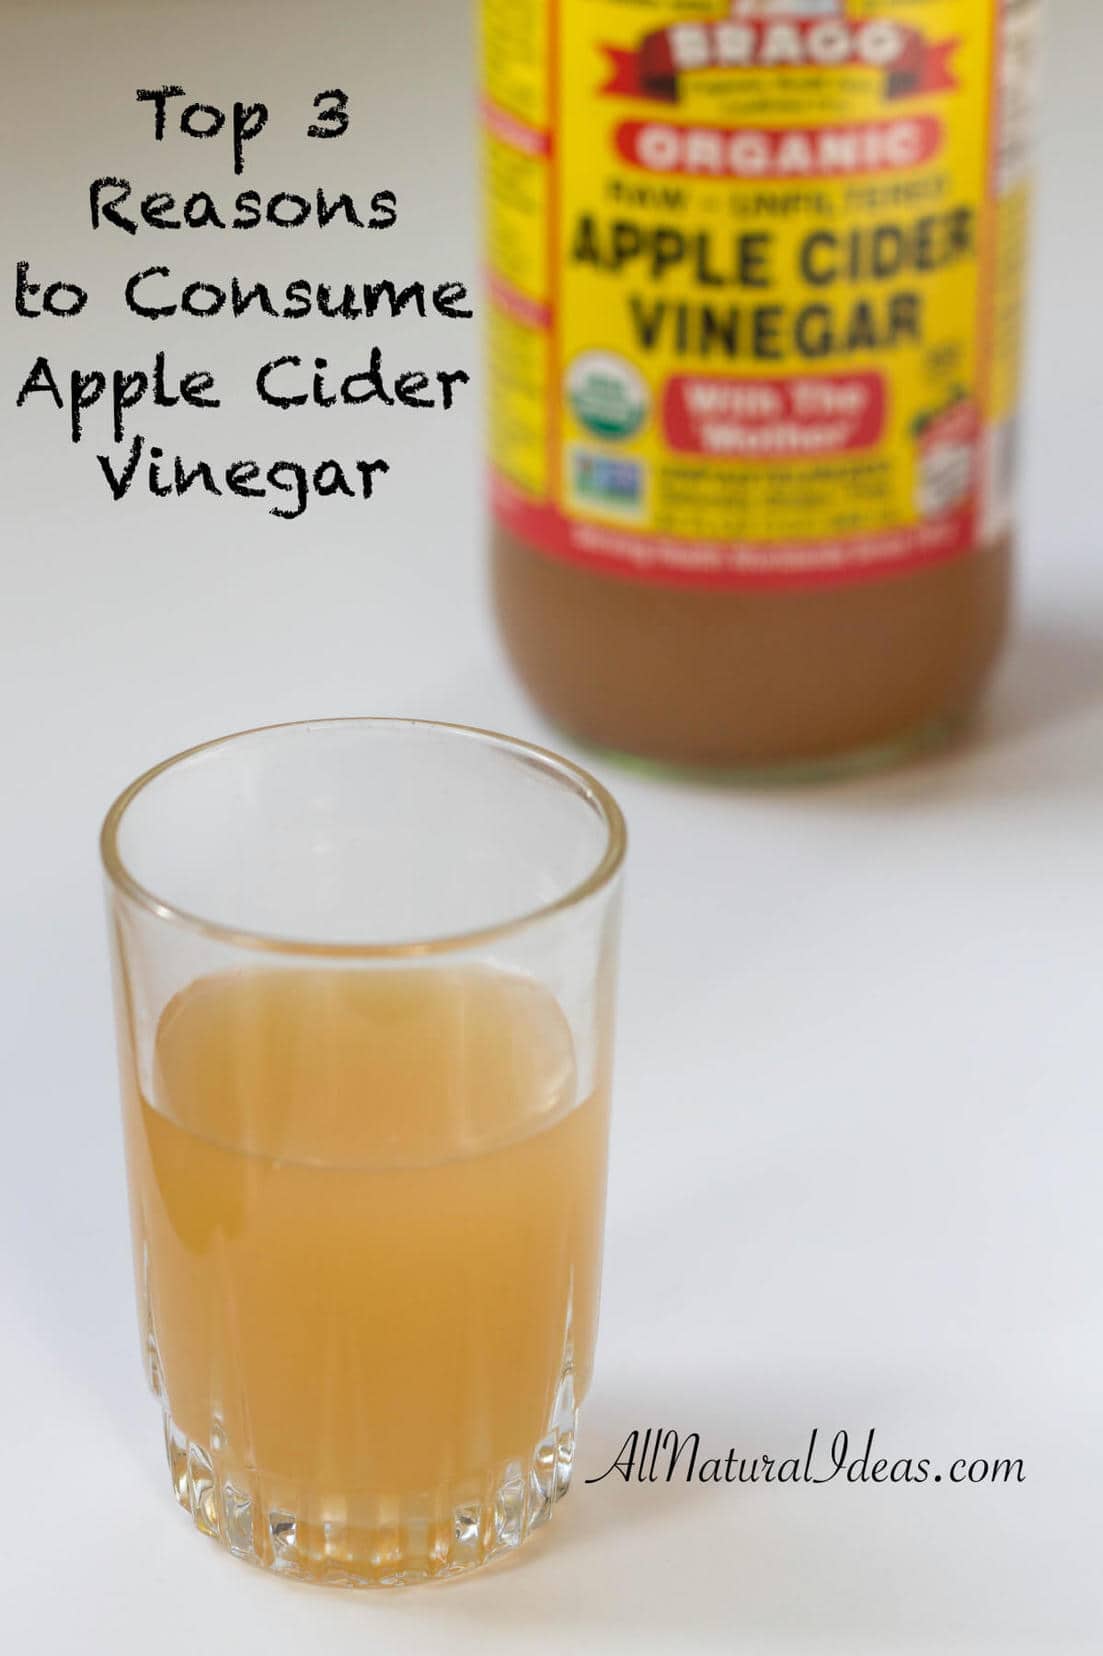 Let's examine the top benefits of drinking apple cider vinegar. Beyond a seasoning, apple cider vinegar can lower blood sugar and prevent heart disease.